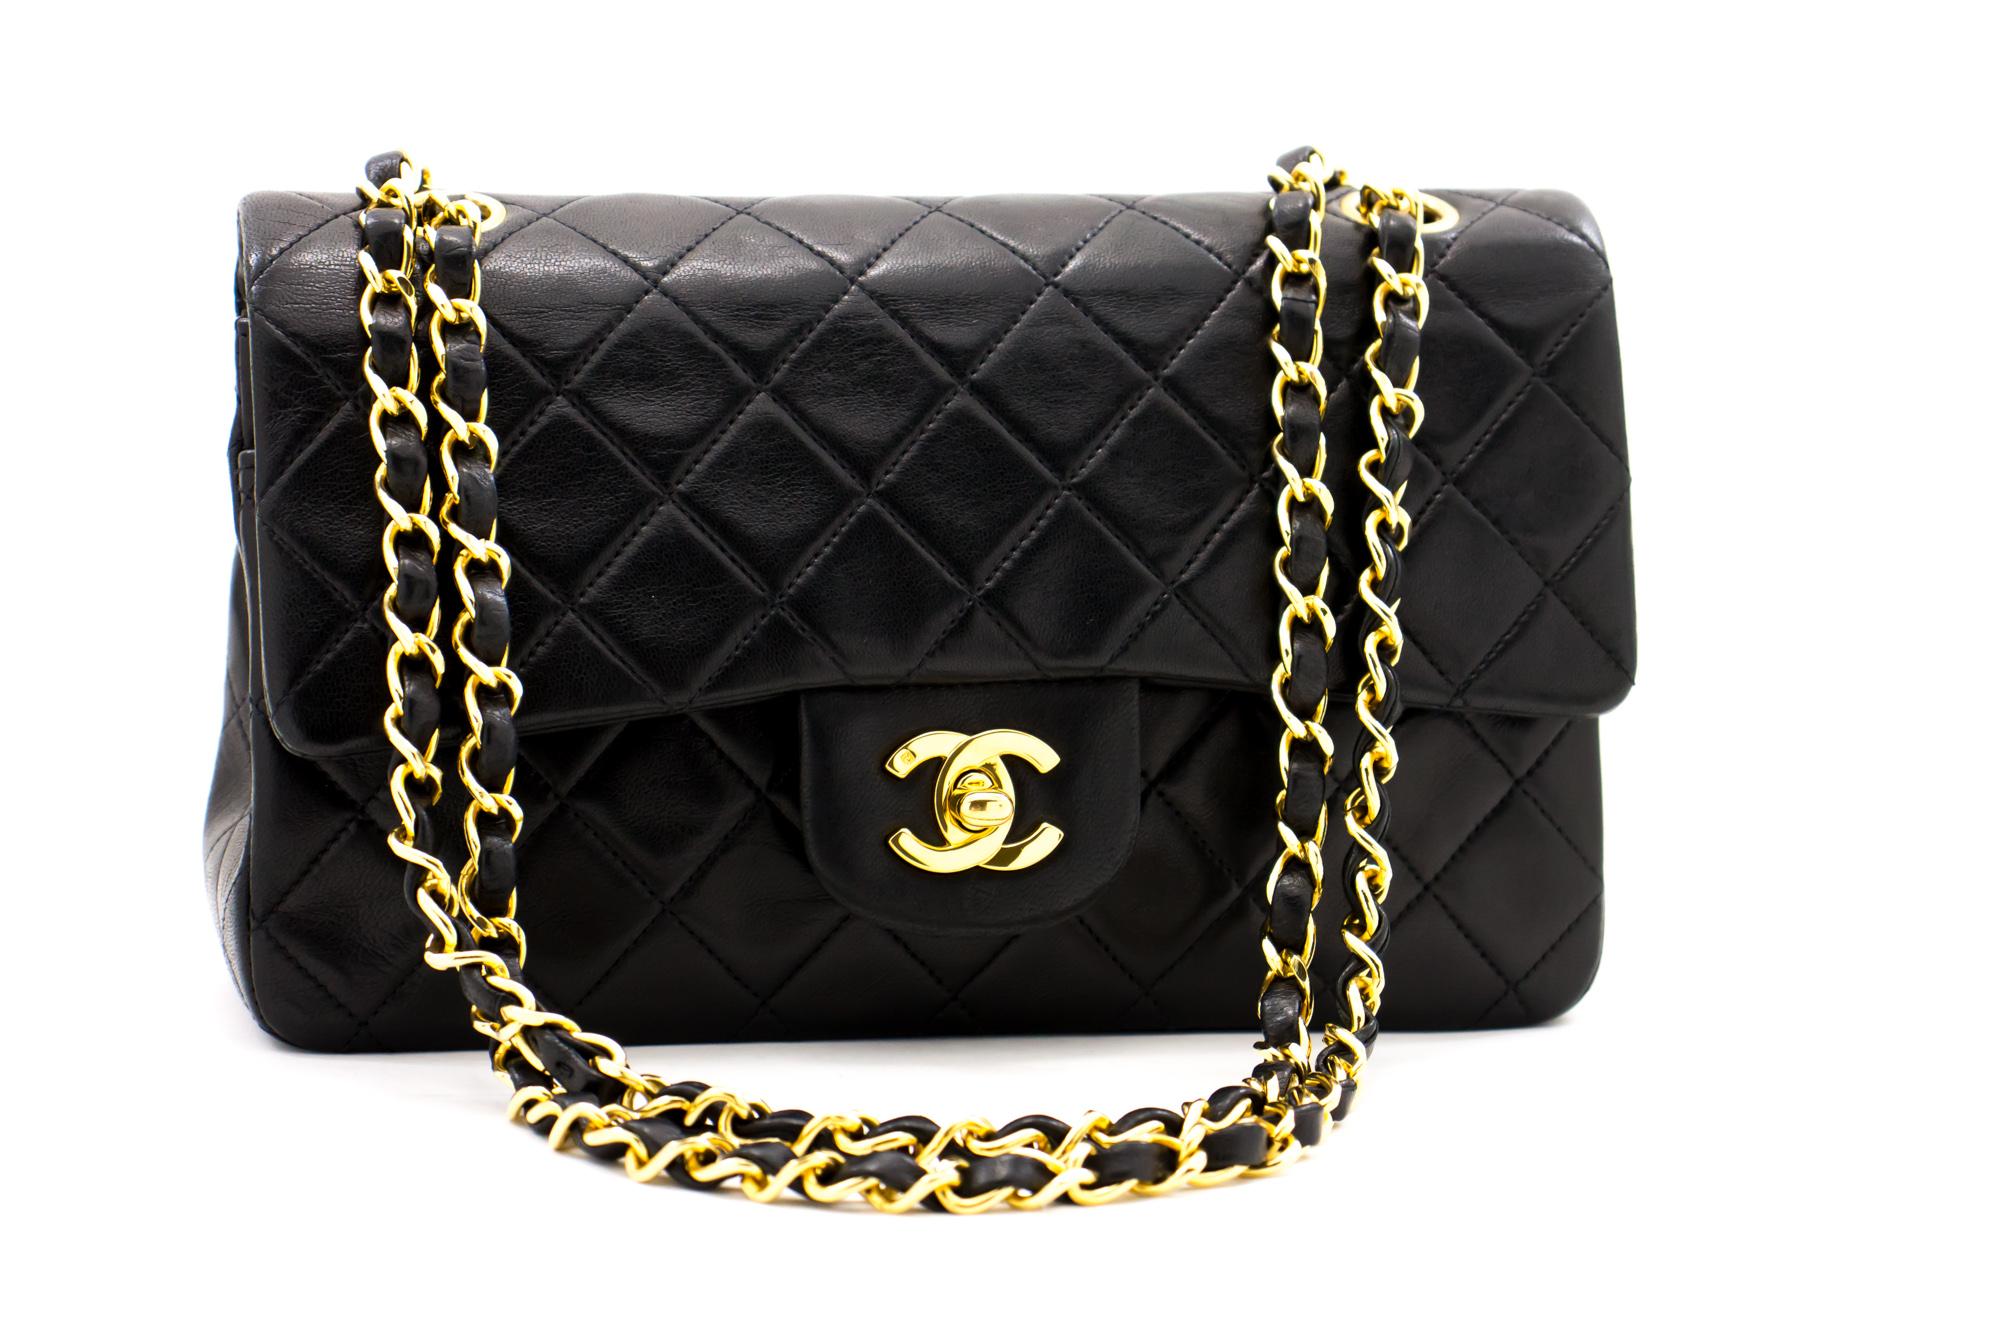 An authentic CHANEL 2.55 Classic Double Flap 9